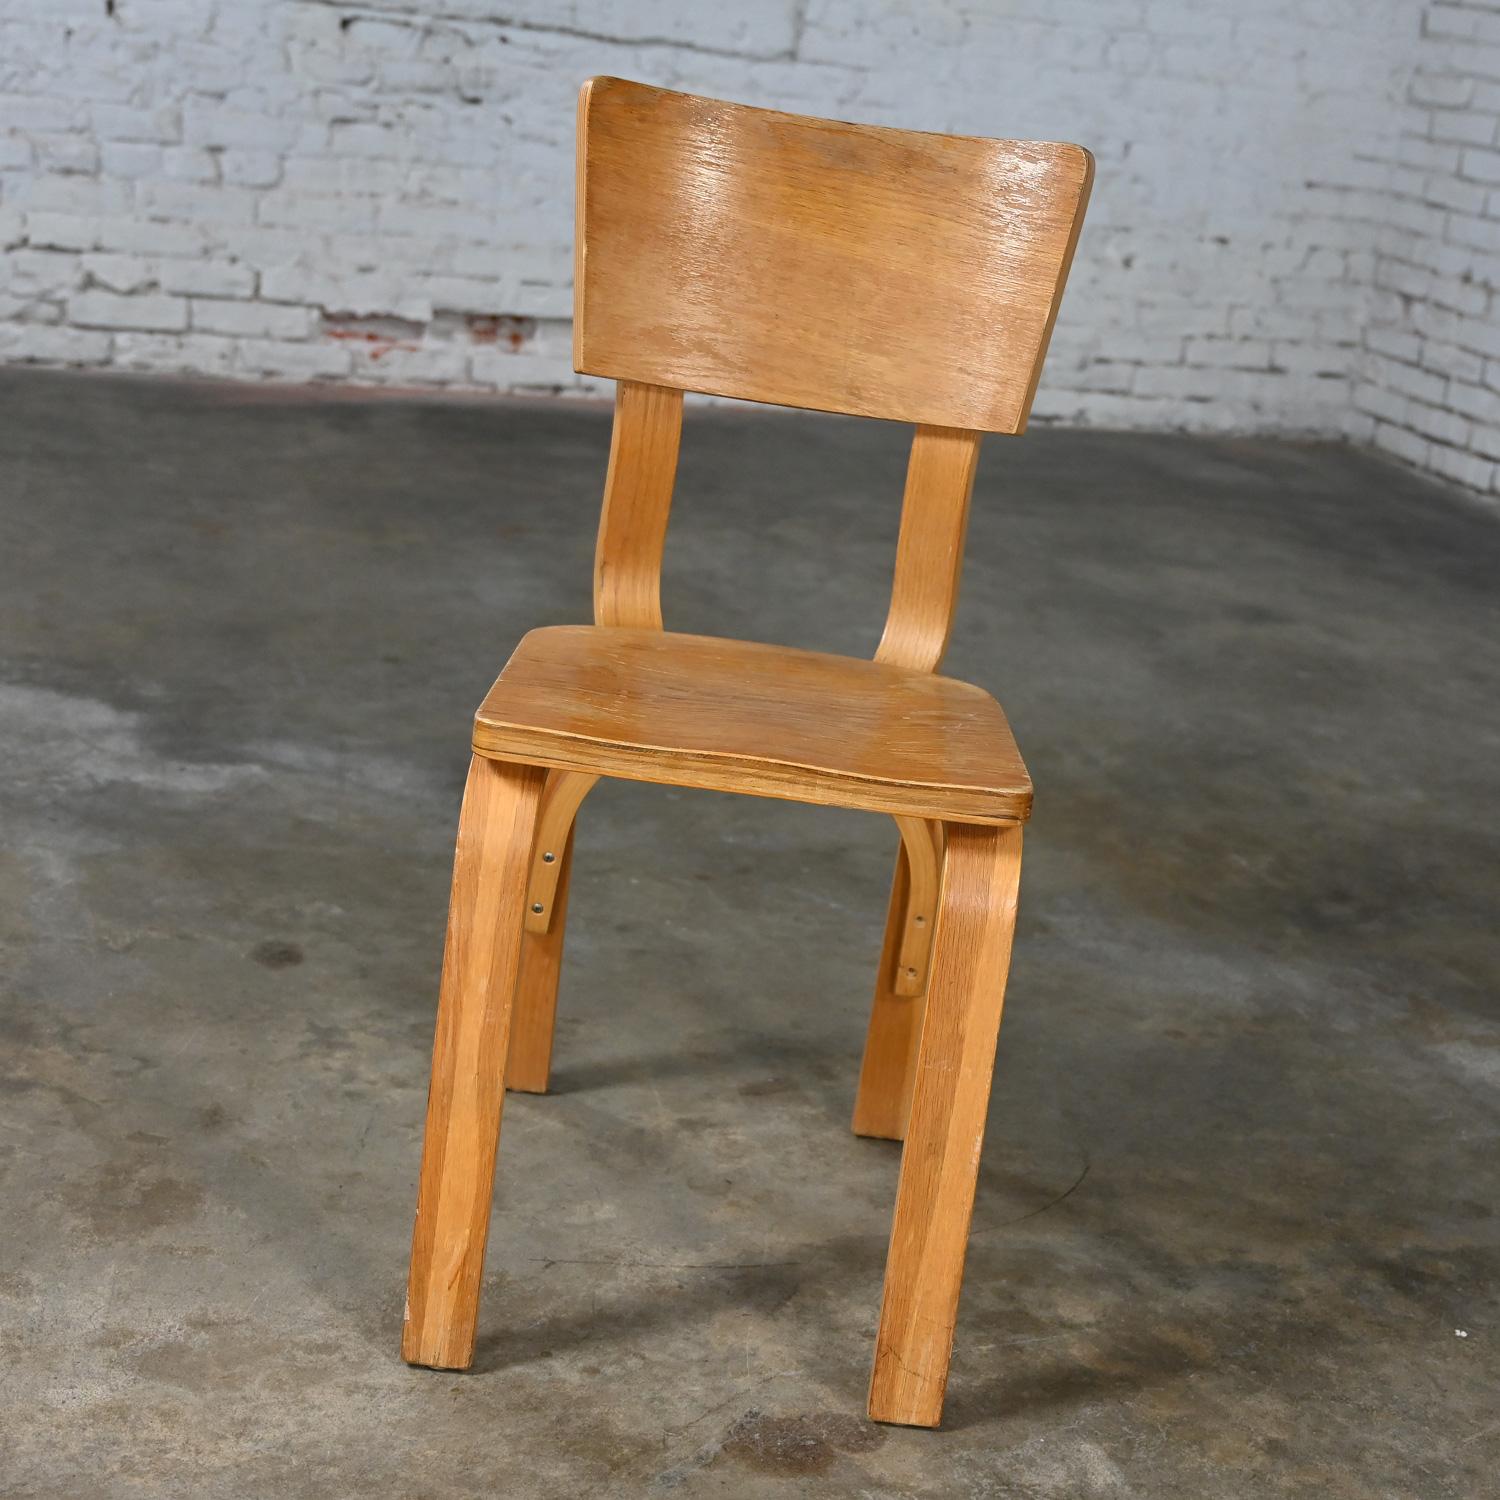 Handsome vintage Mid-Century Modern Thonet #1216-S17-B1 dining chairs comprised of bent oak plywood with saddle seats and a single bow back stretcher 22 available, selling separately & priced per chair, as is condition. See note below regarding